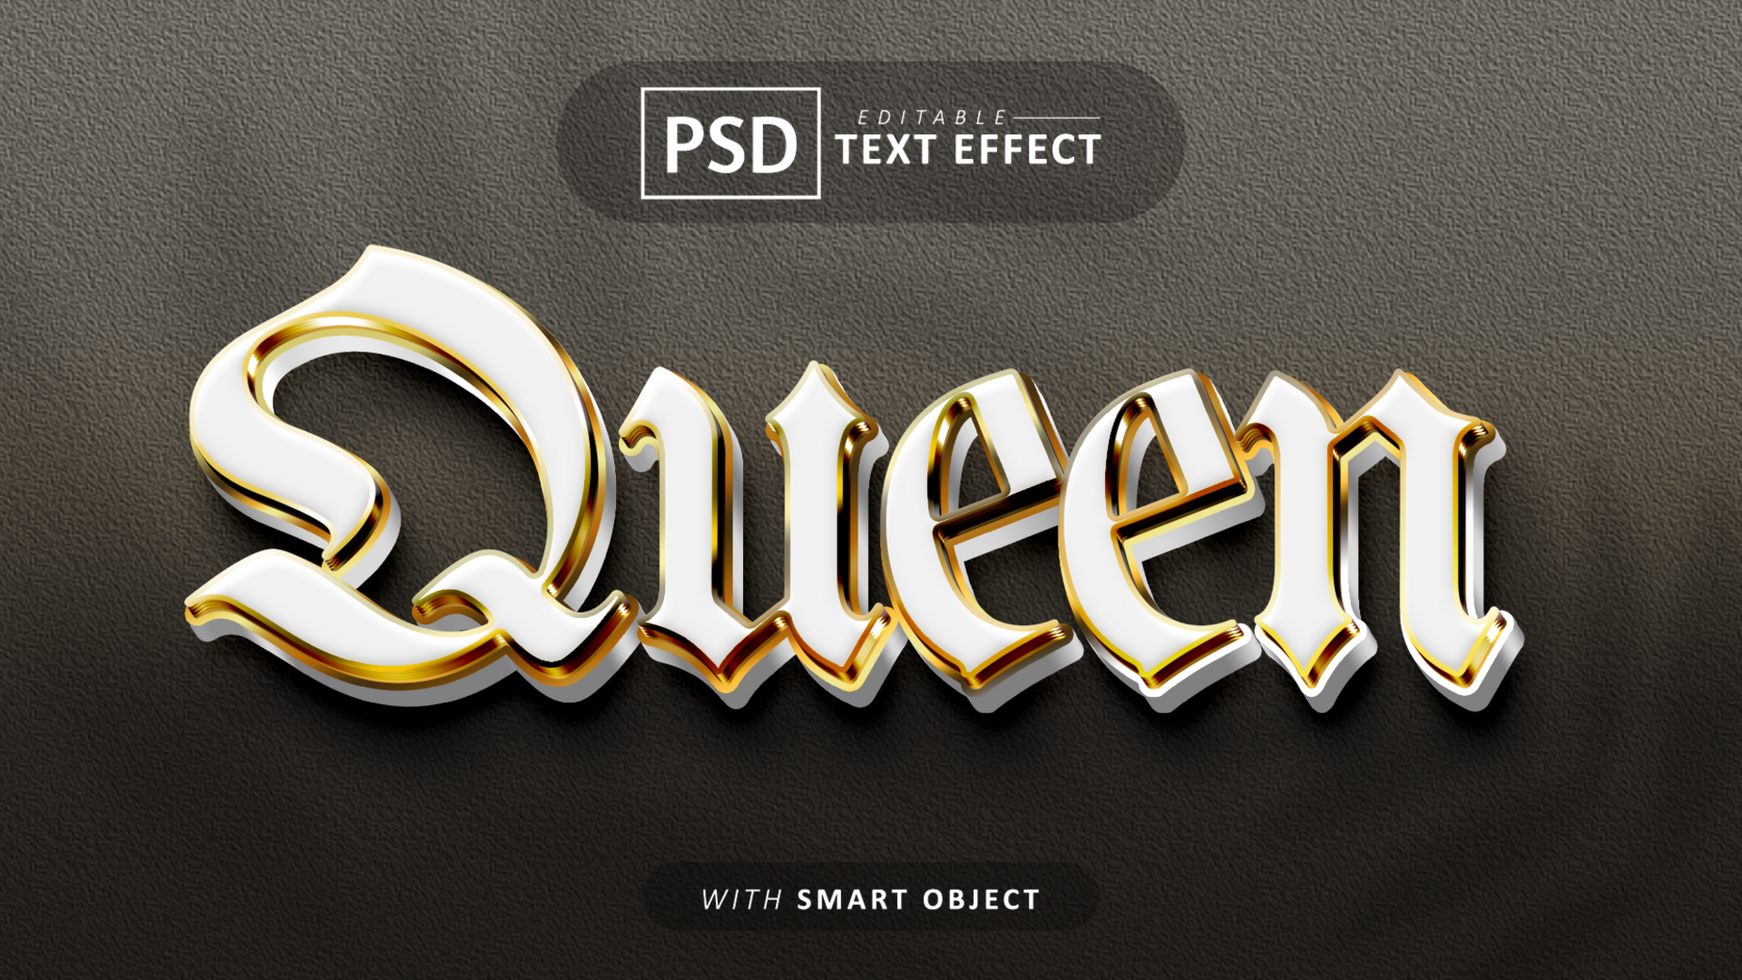 Queen luxury white gold text effect psd